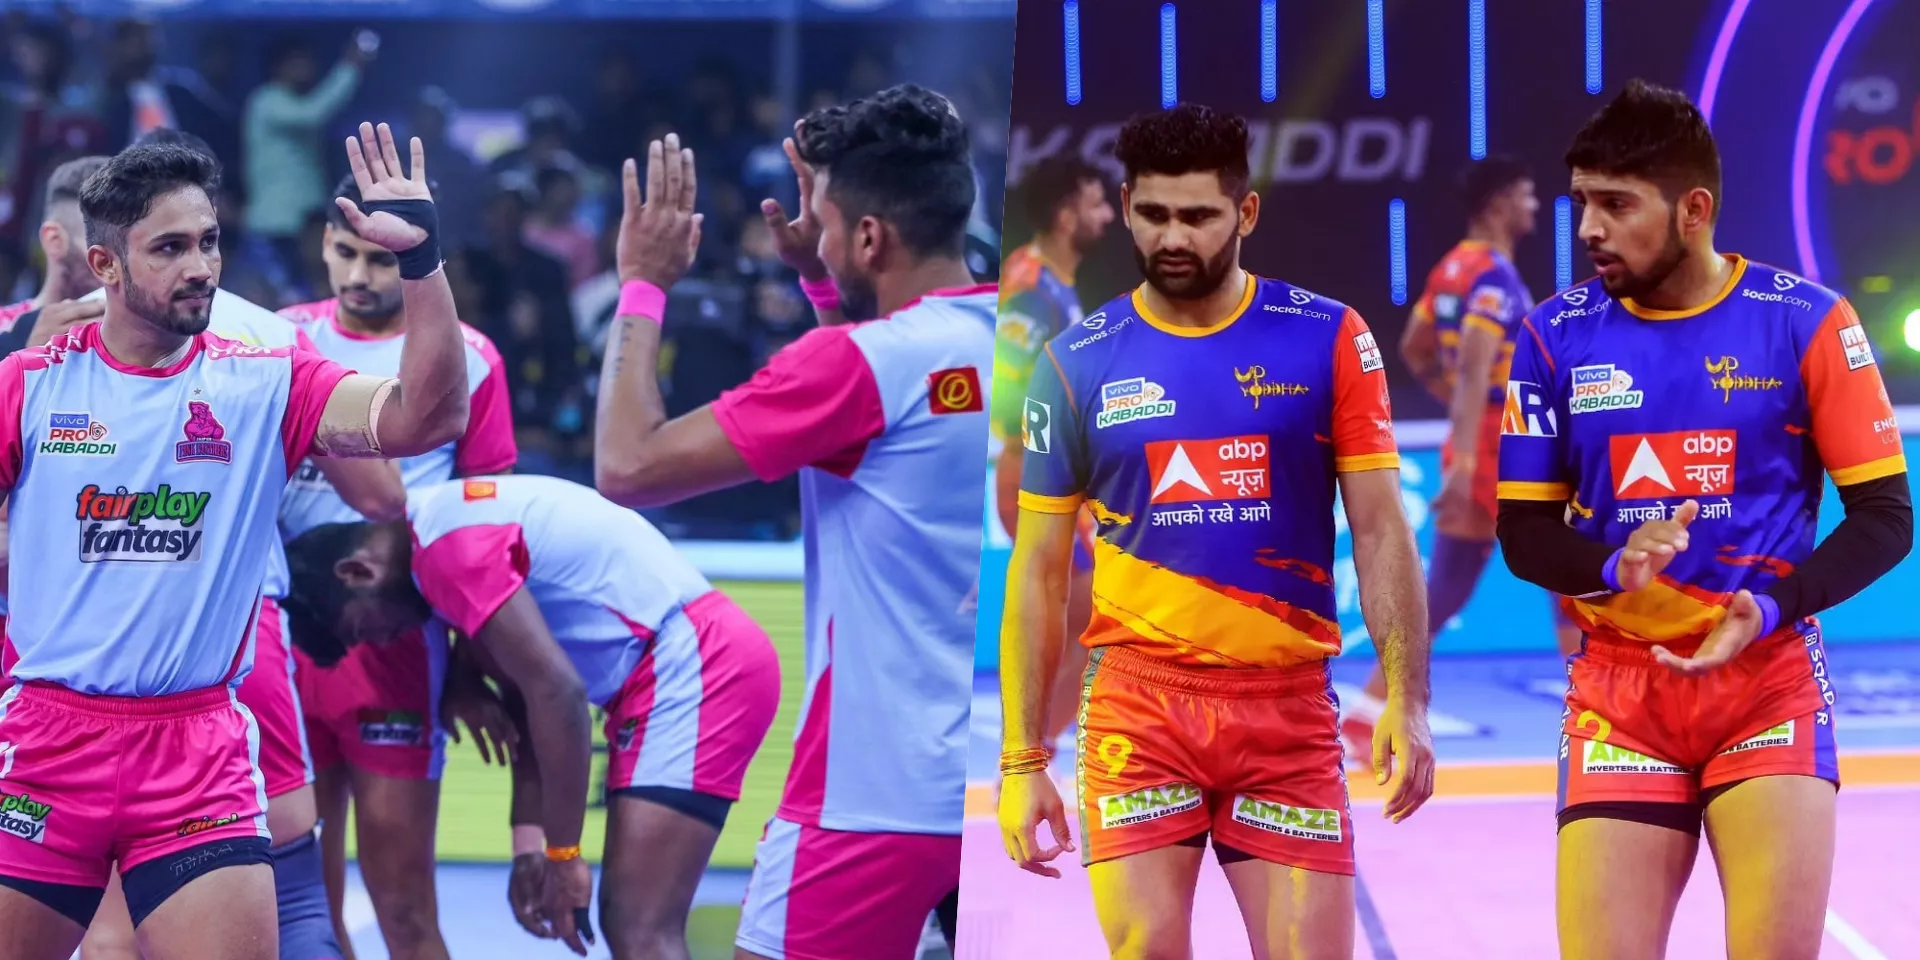 PKL 10: Top five teams who are strong contenders to win title in upcoming season